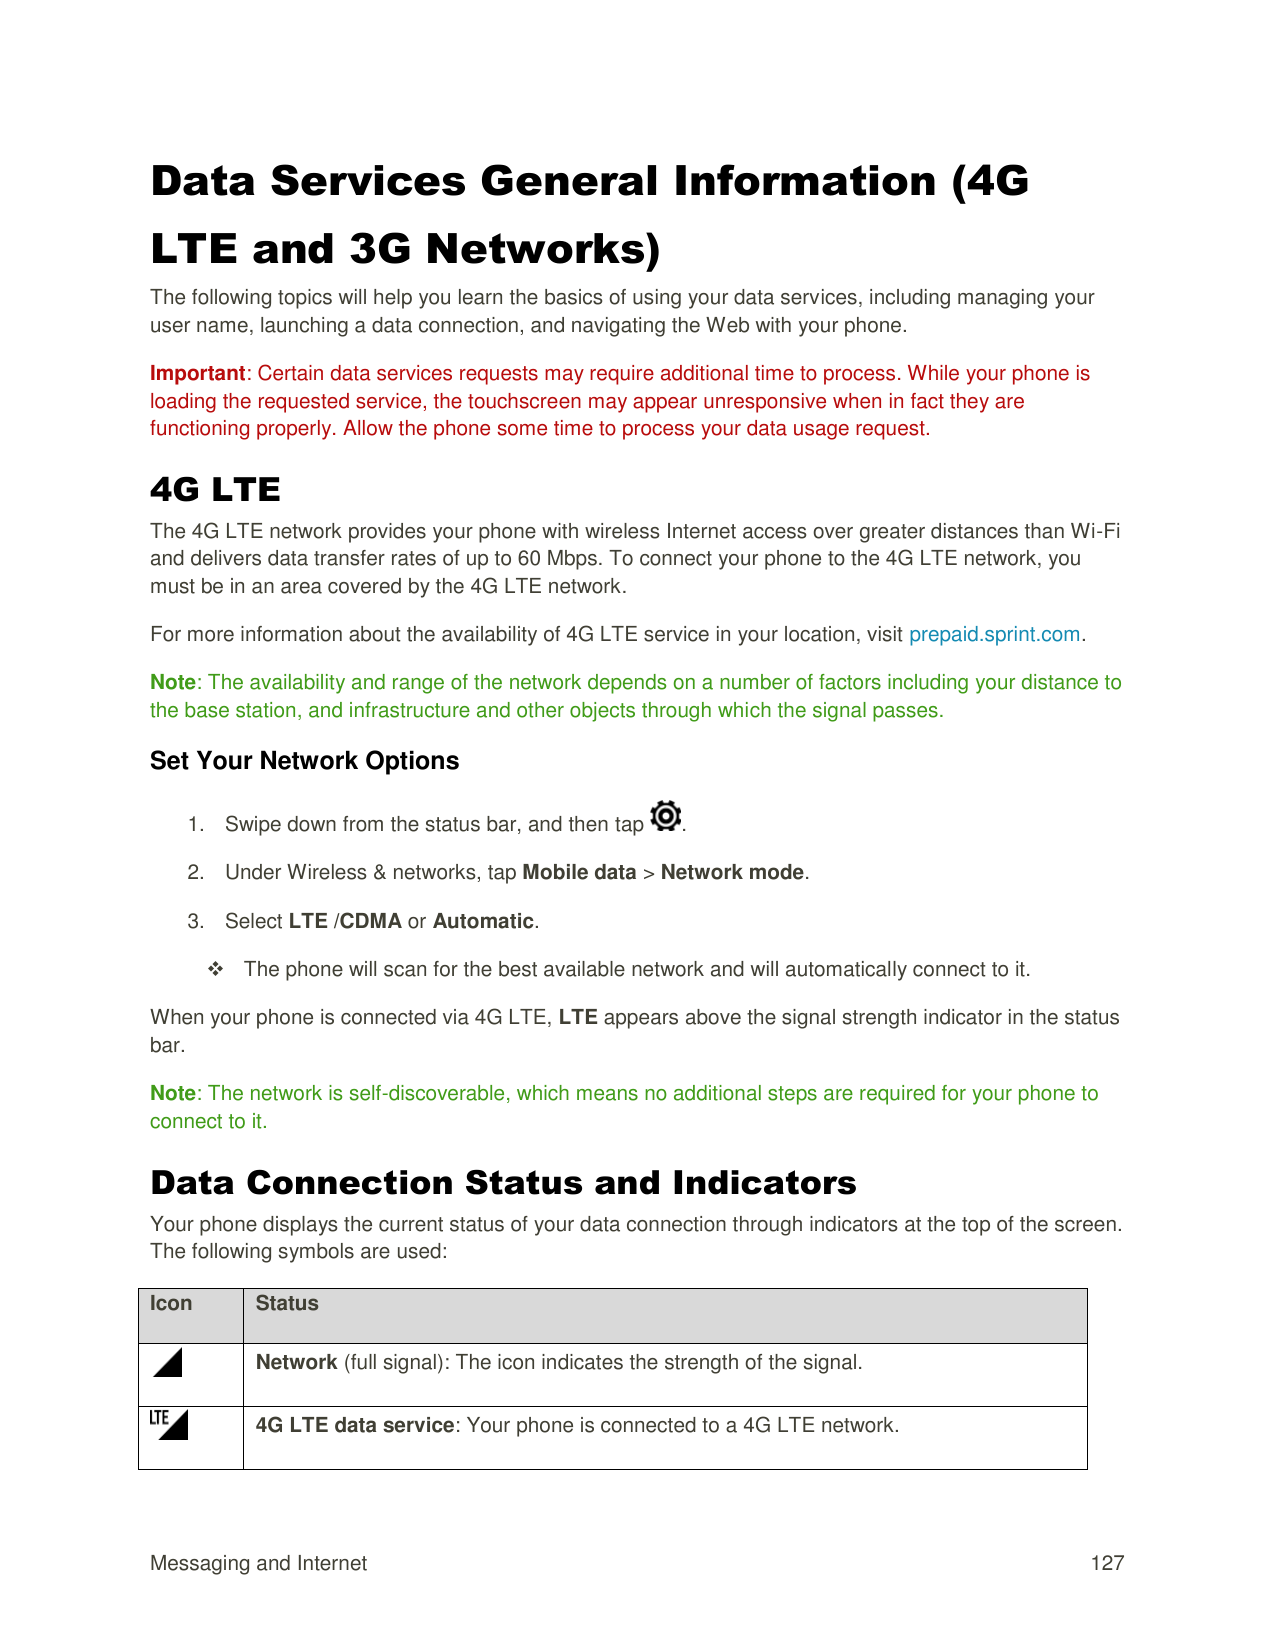 Data Services General Information (4GLTE and 3G Networks)The following topics will help you learn the basics of using your data 